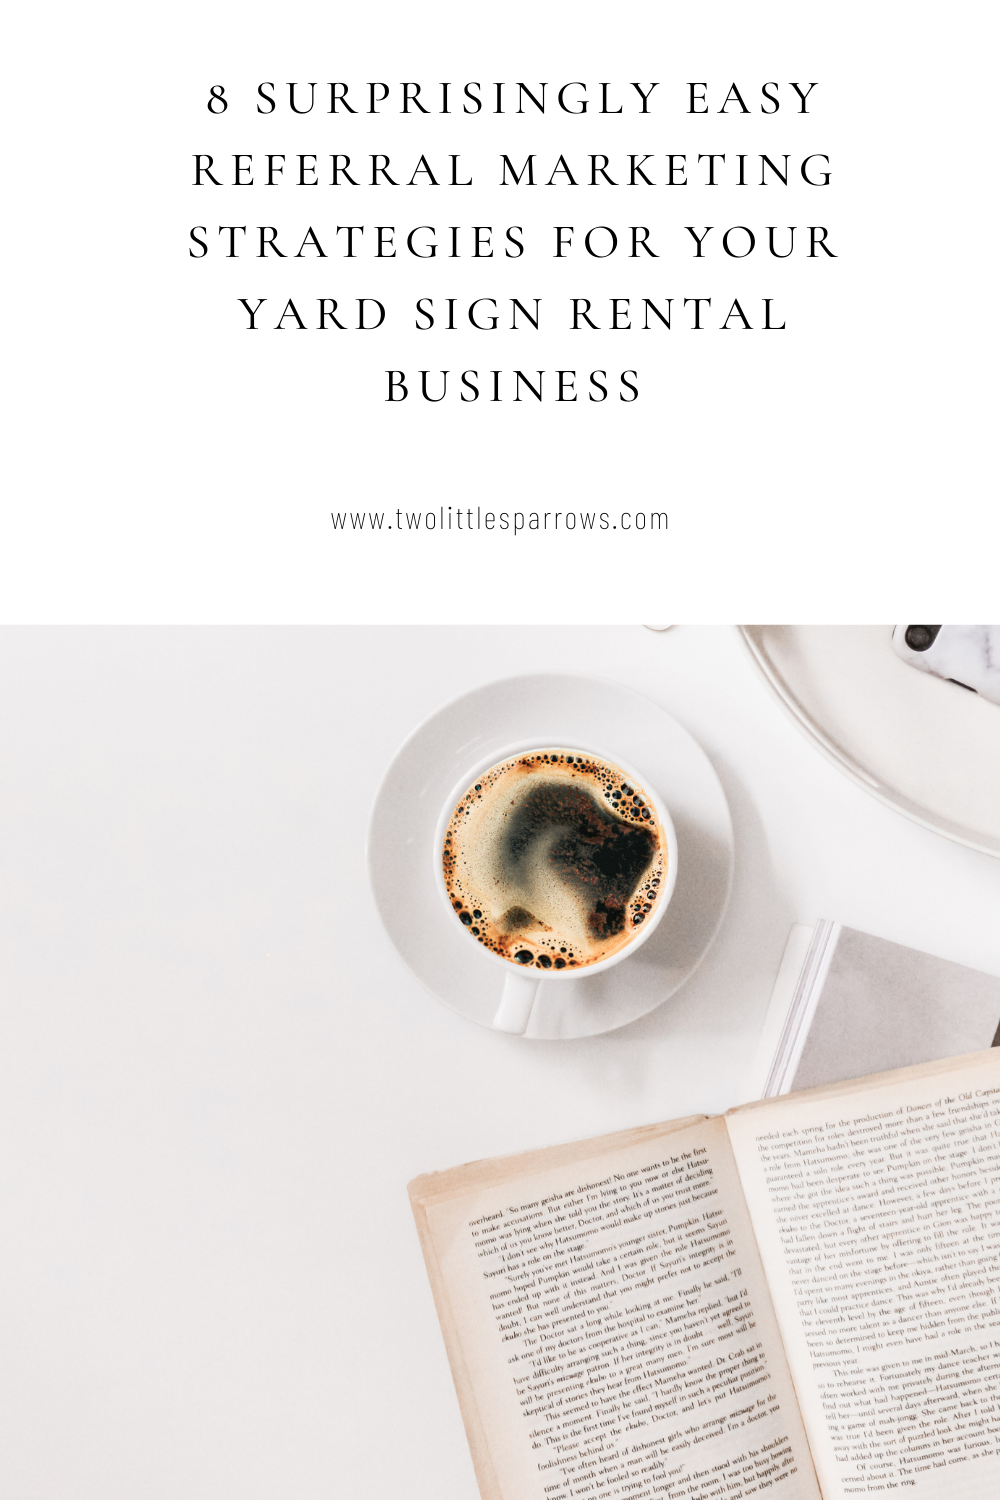 Surprisingly Easy Referral Marketing Strategies for Your Yard Sign Rental Business